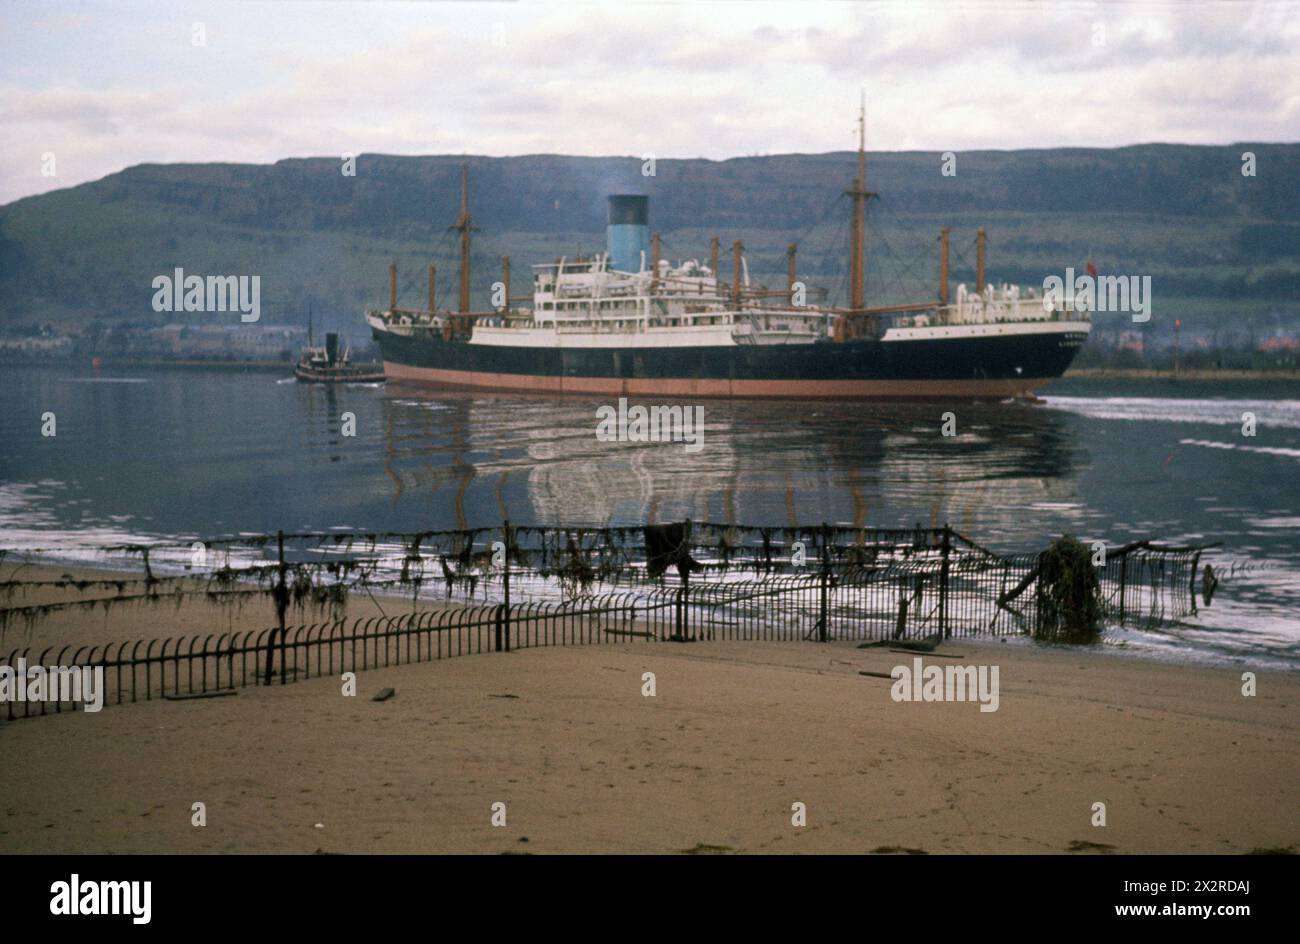 Lycaon (refrigerated cargo ship) passing Erskine on the River Clyde. 28 December 1960. Built Vickers-Armstrongs, Newcastle in 1954. Sunk 1979 off Rangoon. Photographed while with Blue Funnel Line. Stock Photo